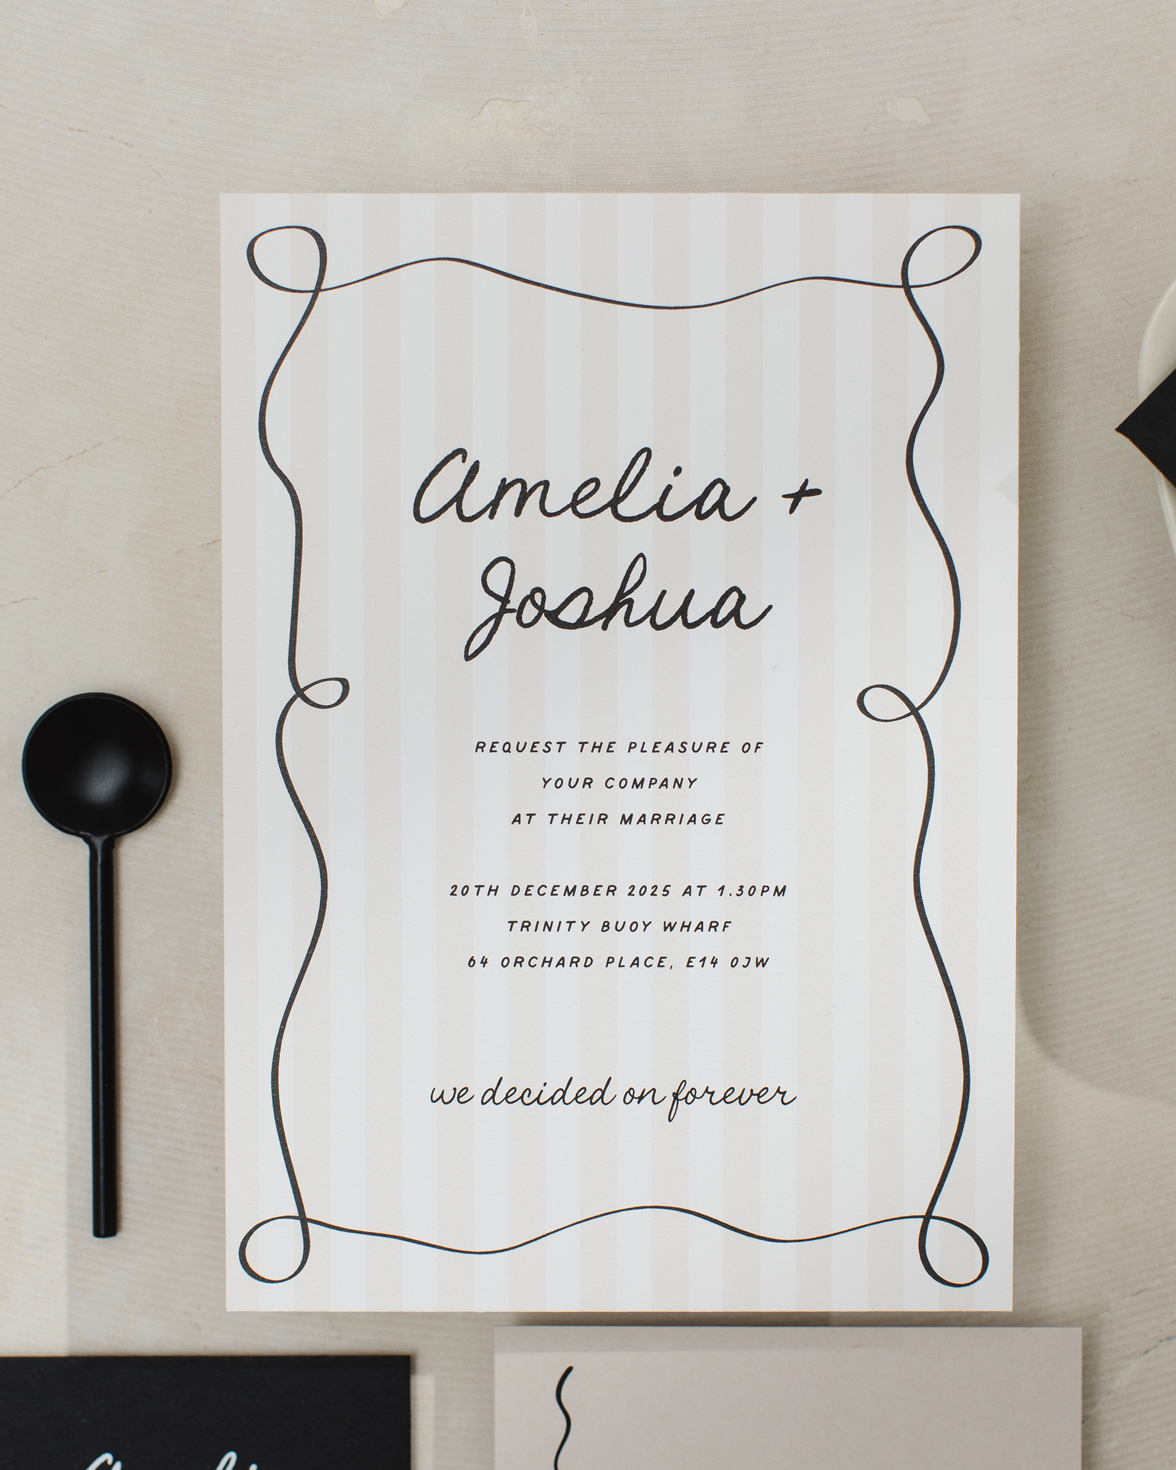 Tonal stripe wedding invitation with squiggly border and hand drawn font. Black RSVP card with white ink and QR code. Stone coloured details card with squiggly line